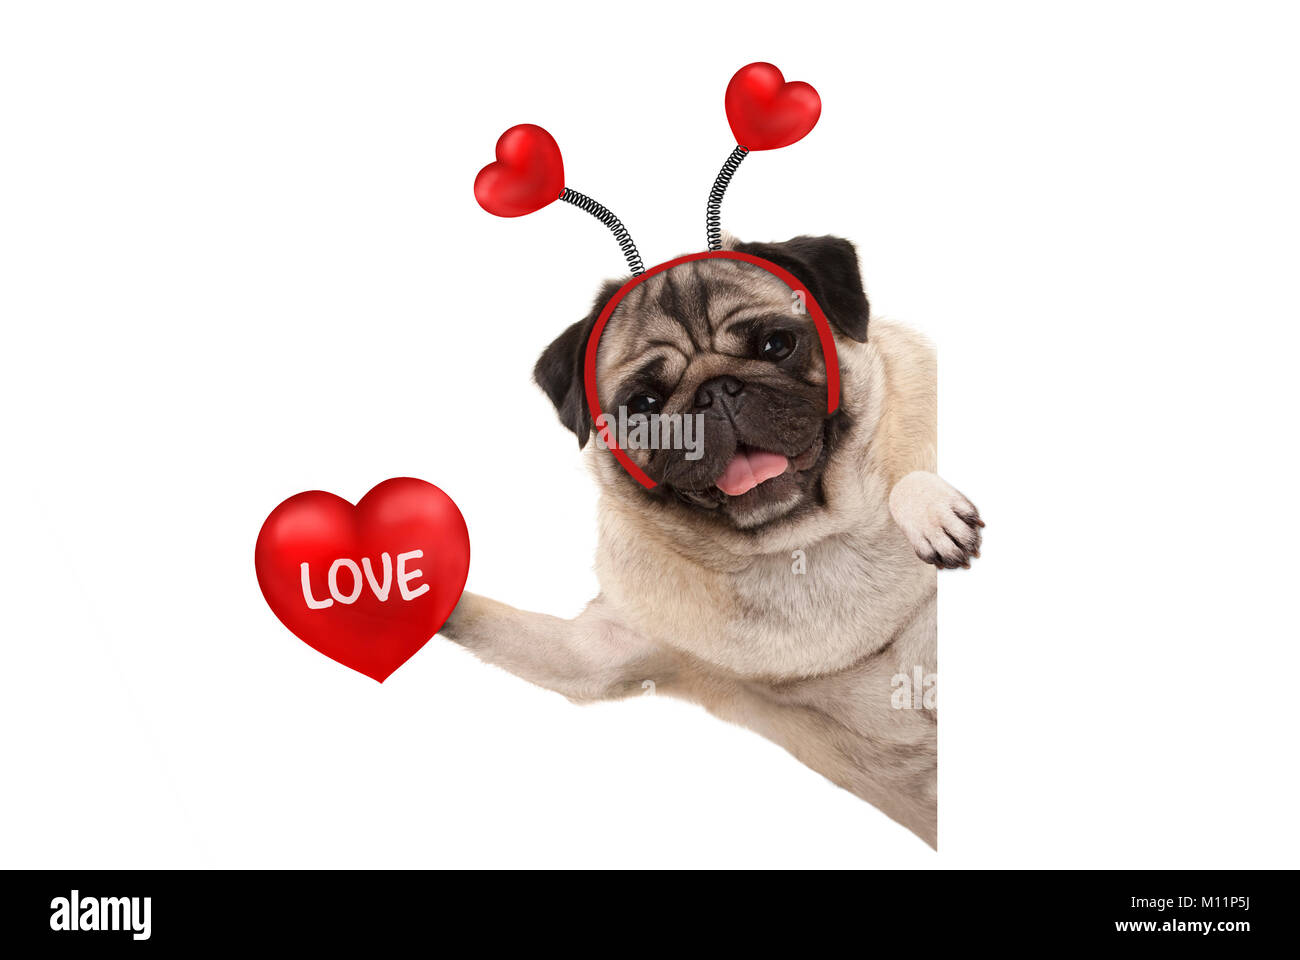 smiling Valentine's day pug dog holding up red heart with text love, isolated on white background Stock Photo